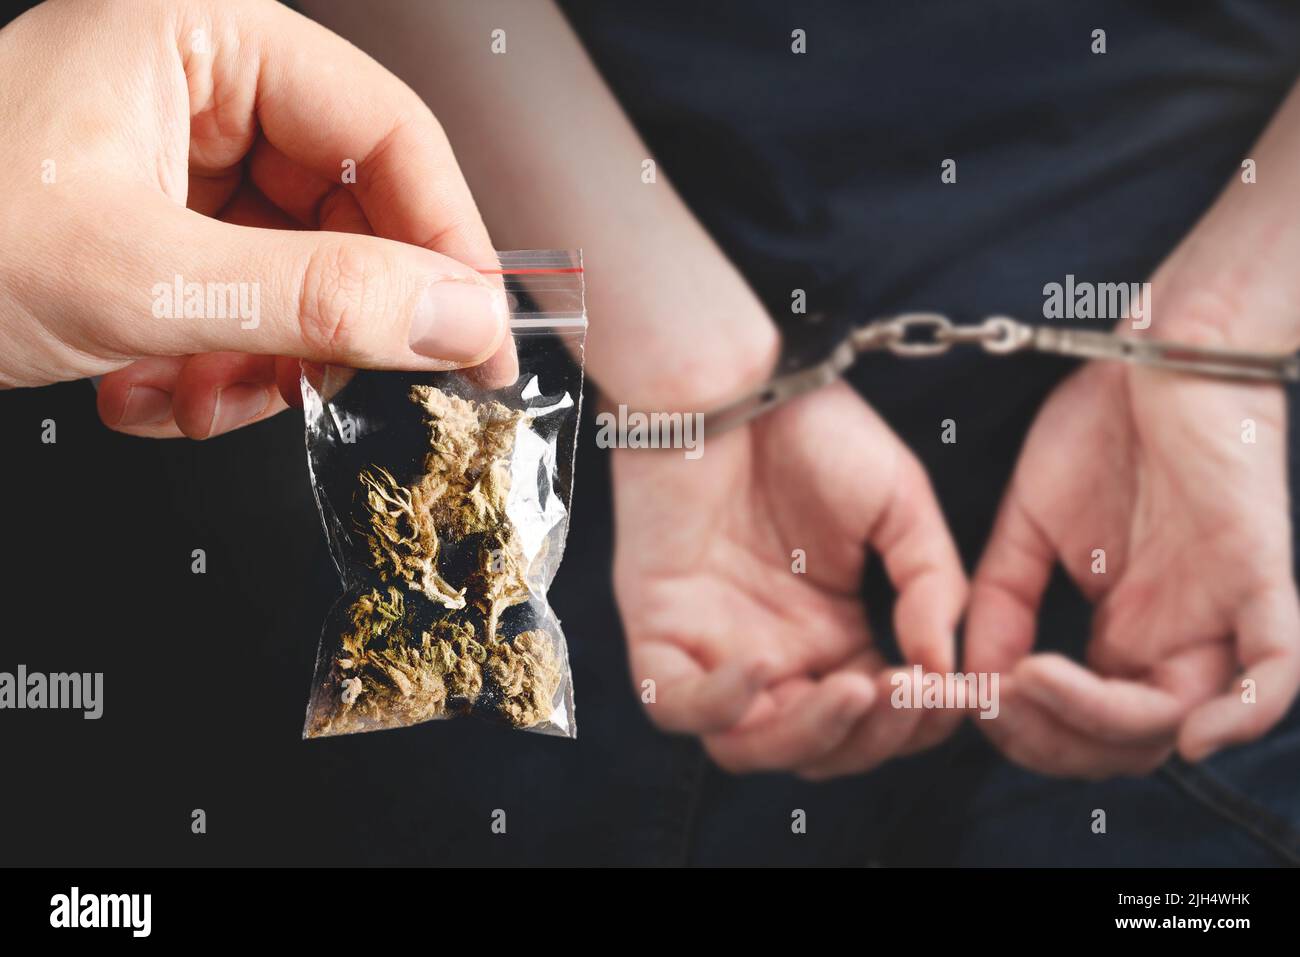 Criminal handcuffed, back view. Criminal arrested, security concept Stock Photo